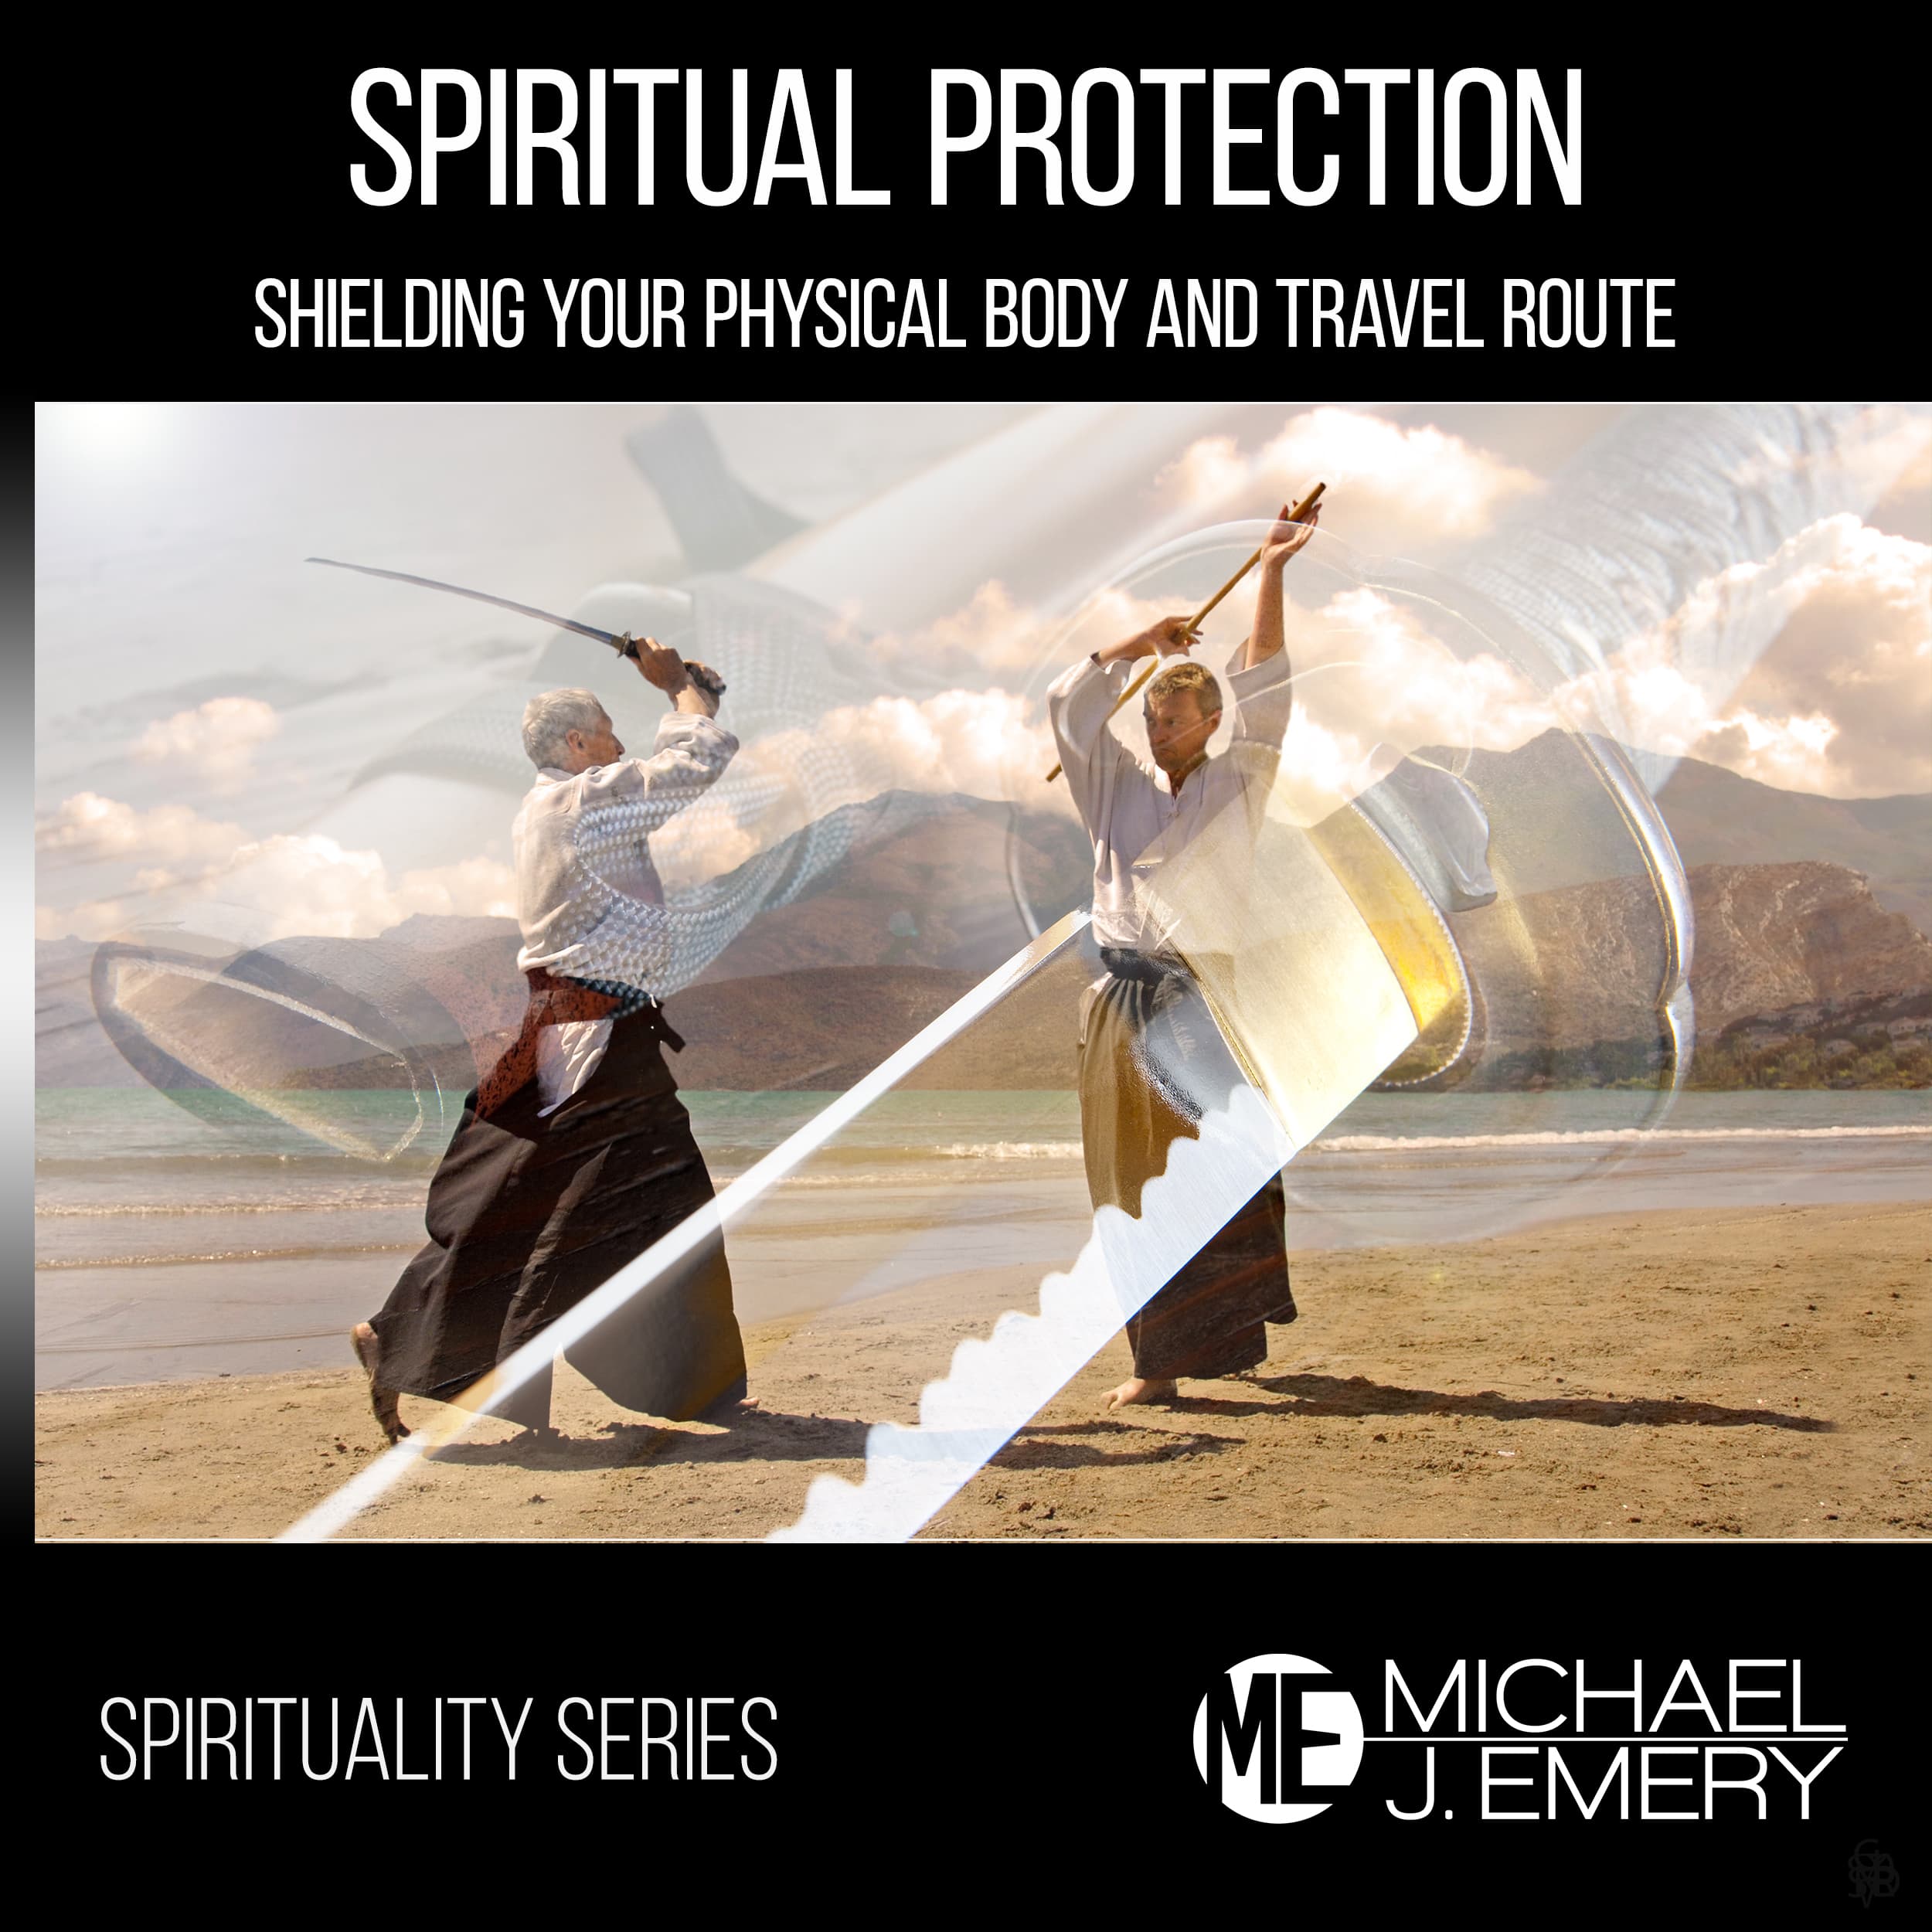 Spiritual-Protection-Shielding-Your-Physical-Body-and-Travel-Route-pichi